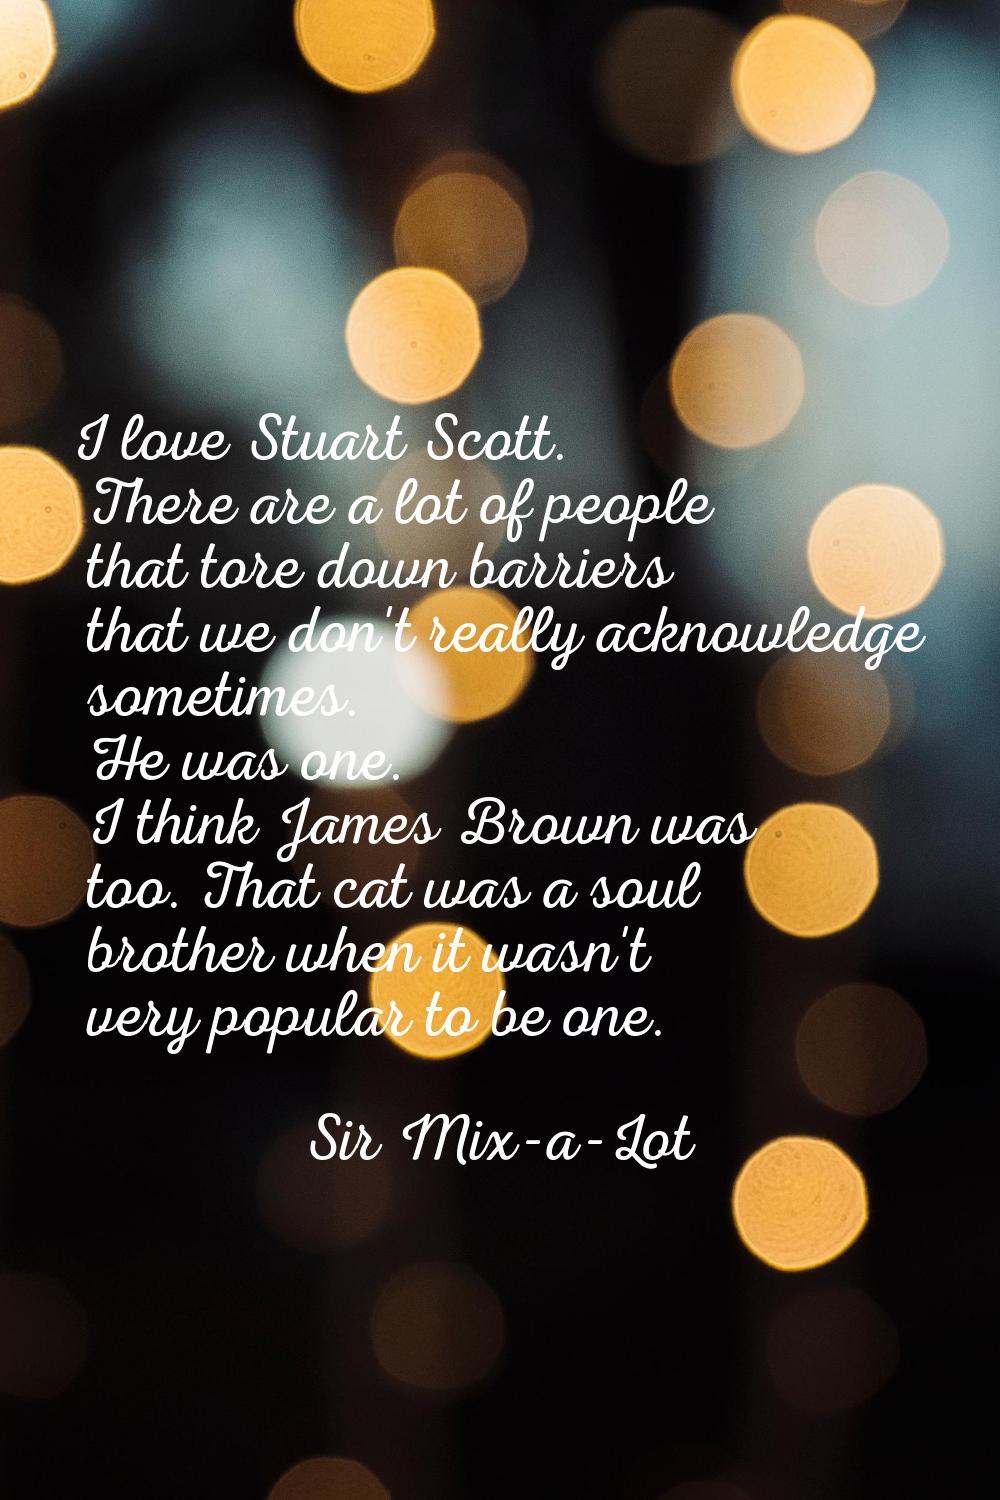 I love Stuart Scott. There are a lot of people that tore down barriers that we don't really acknowl